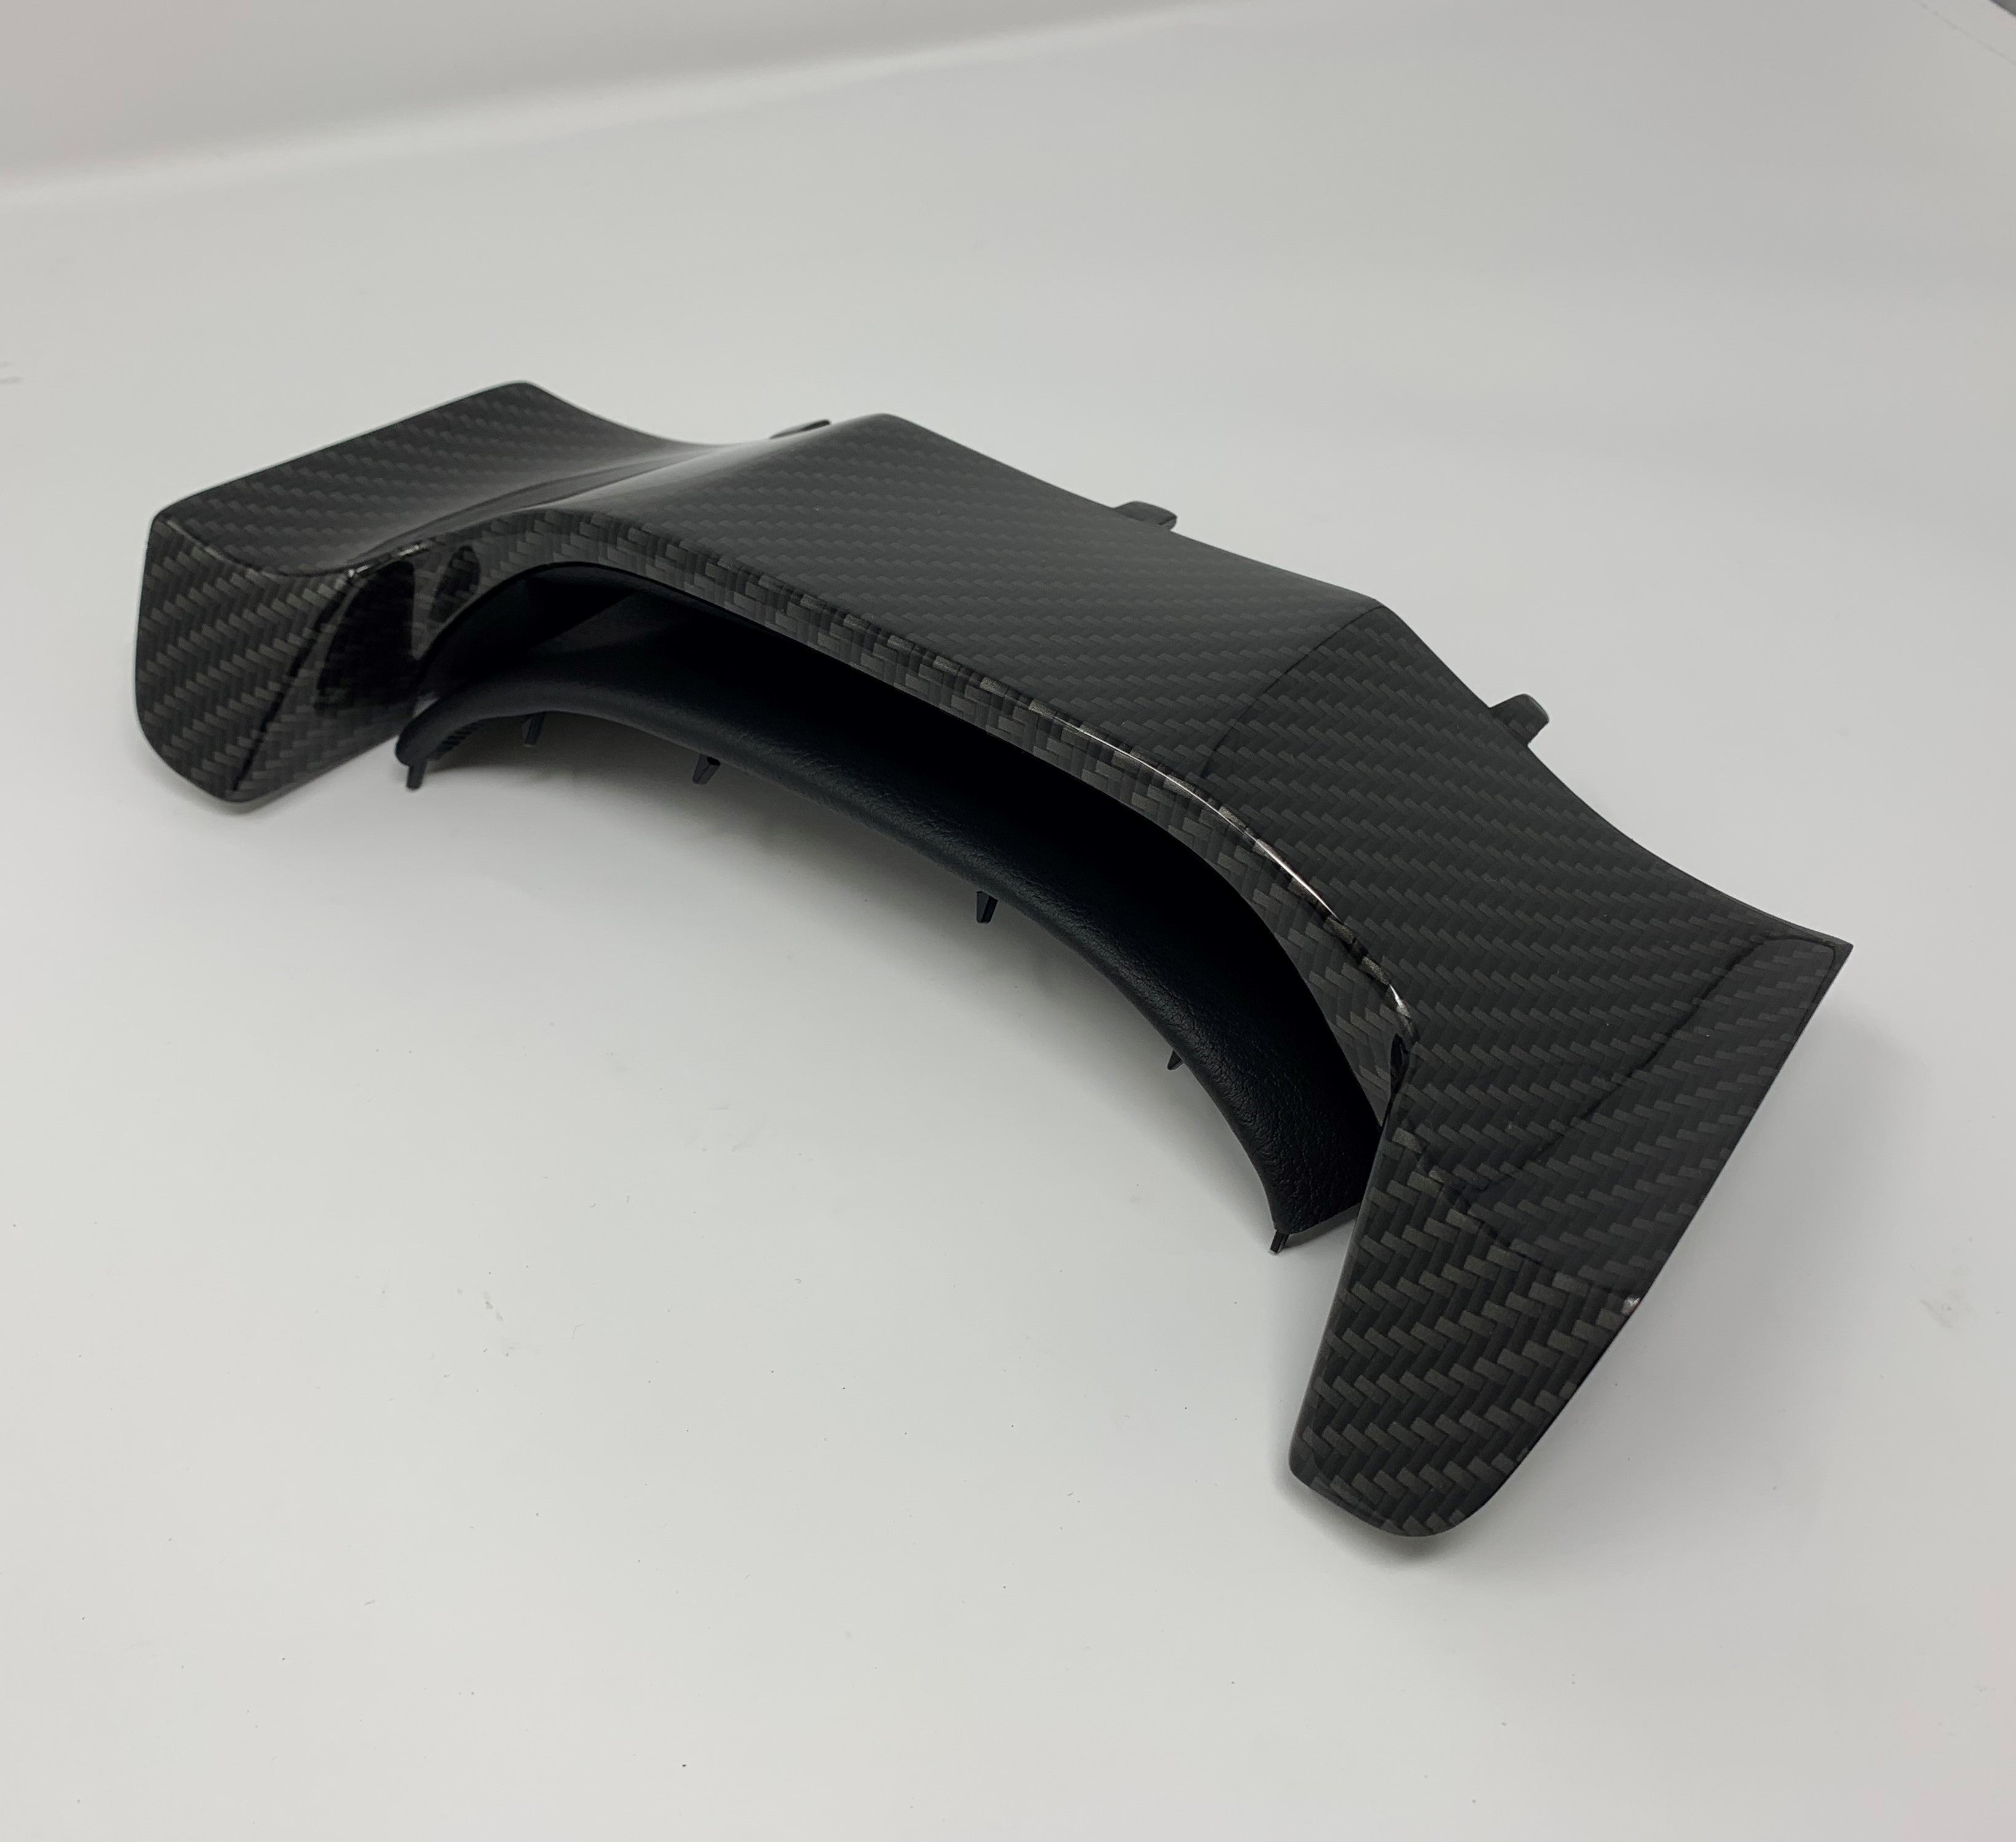 Genuine Ford Main Gauge Pod Trim Carbon Fibre - Mk3/3.5 Focus (Painted/Hydrodipped Finishes)